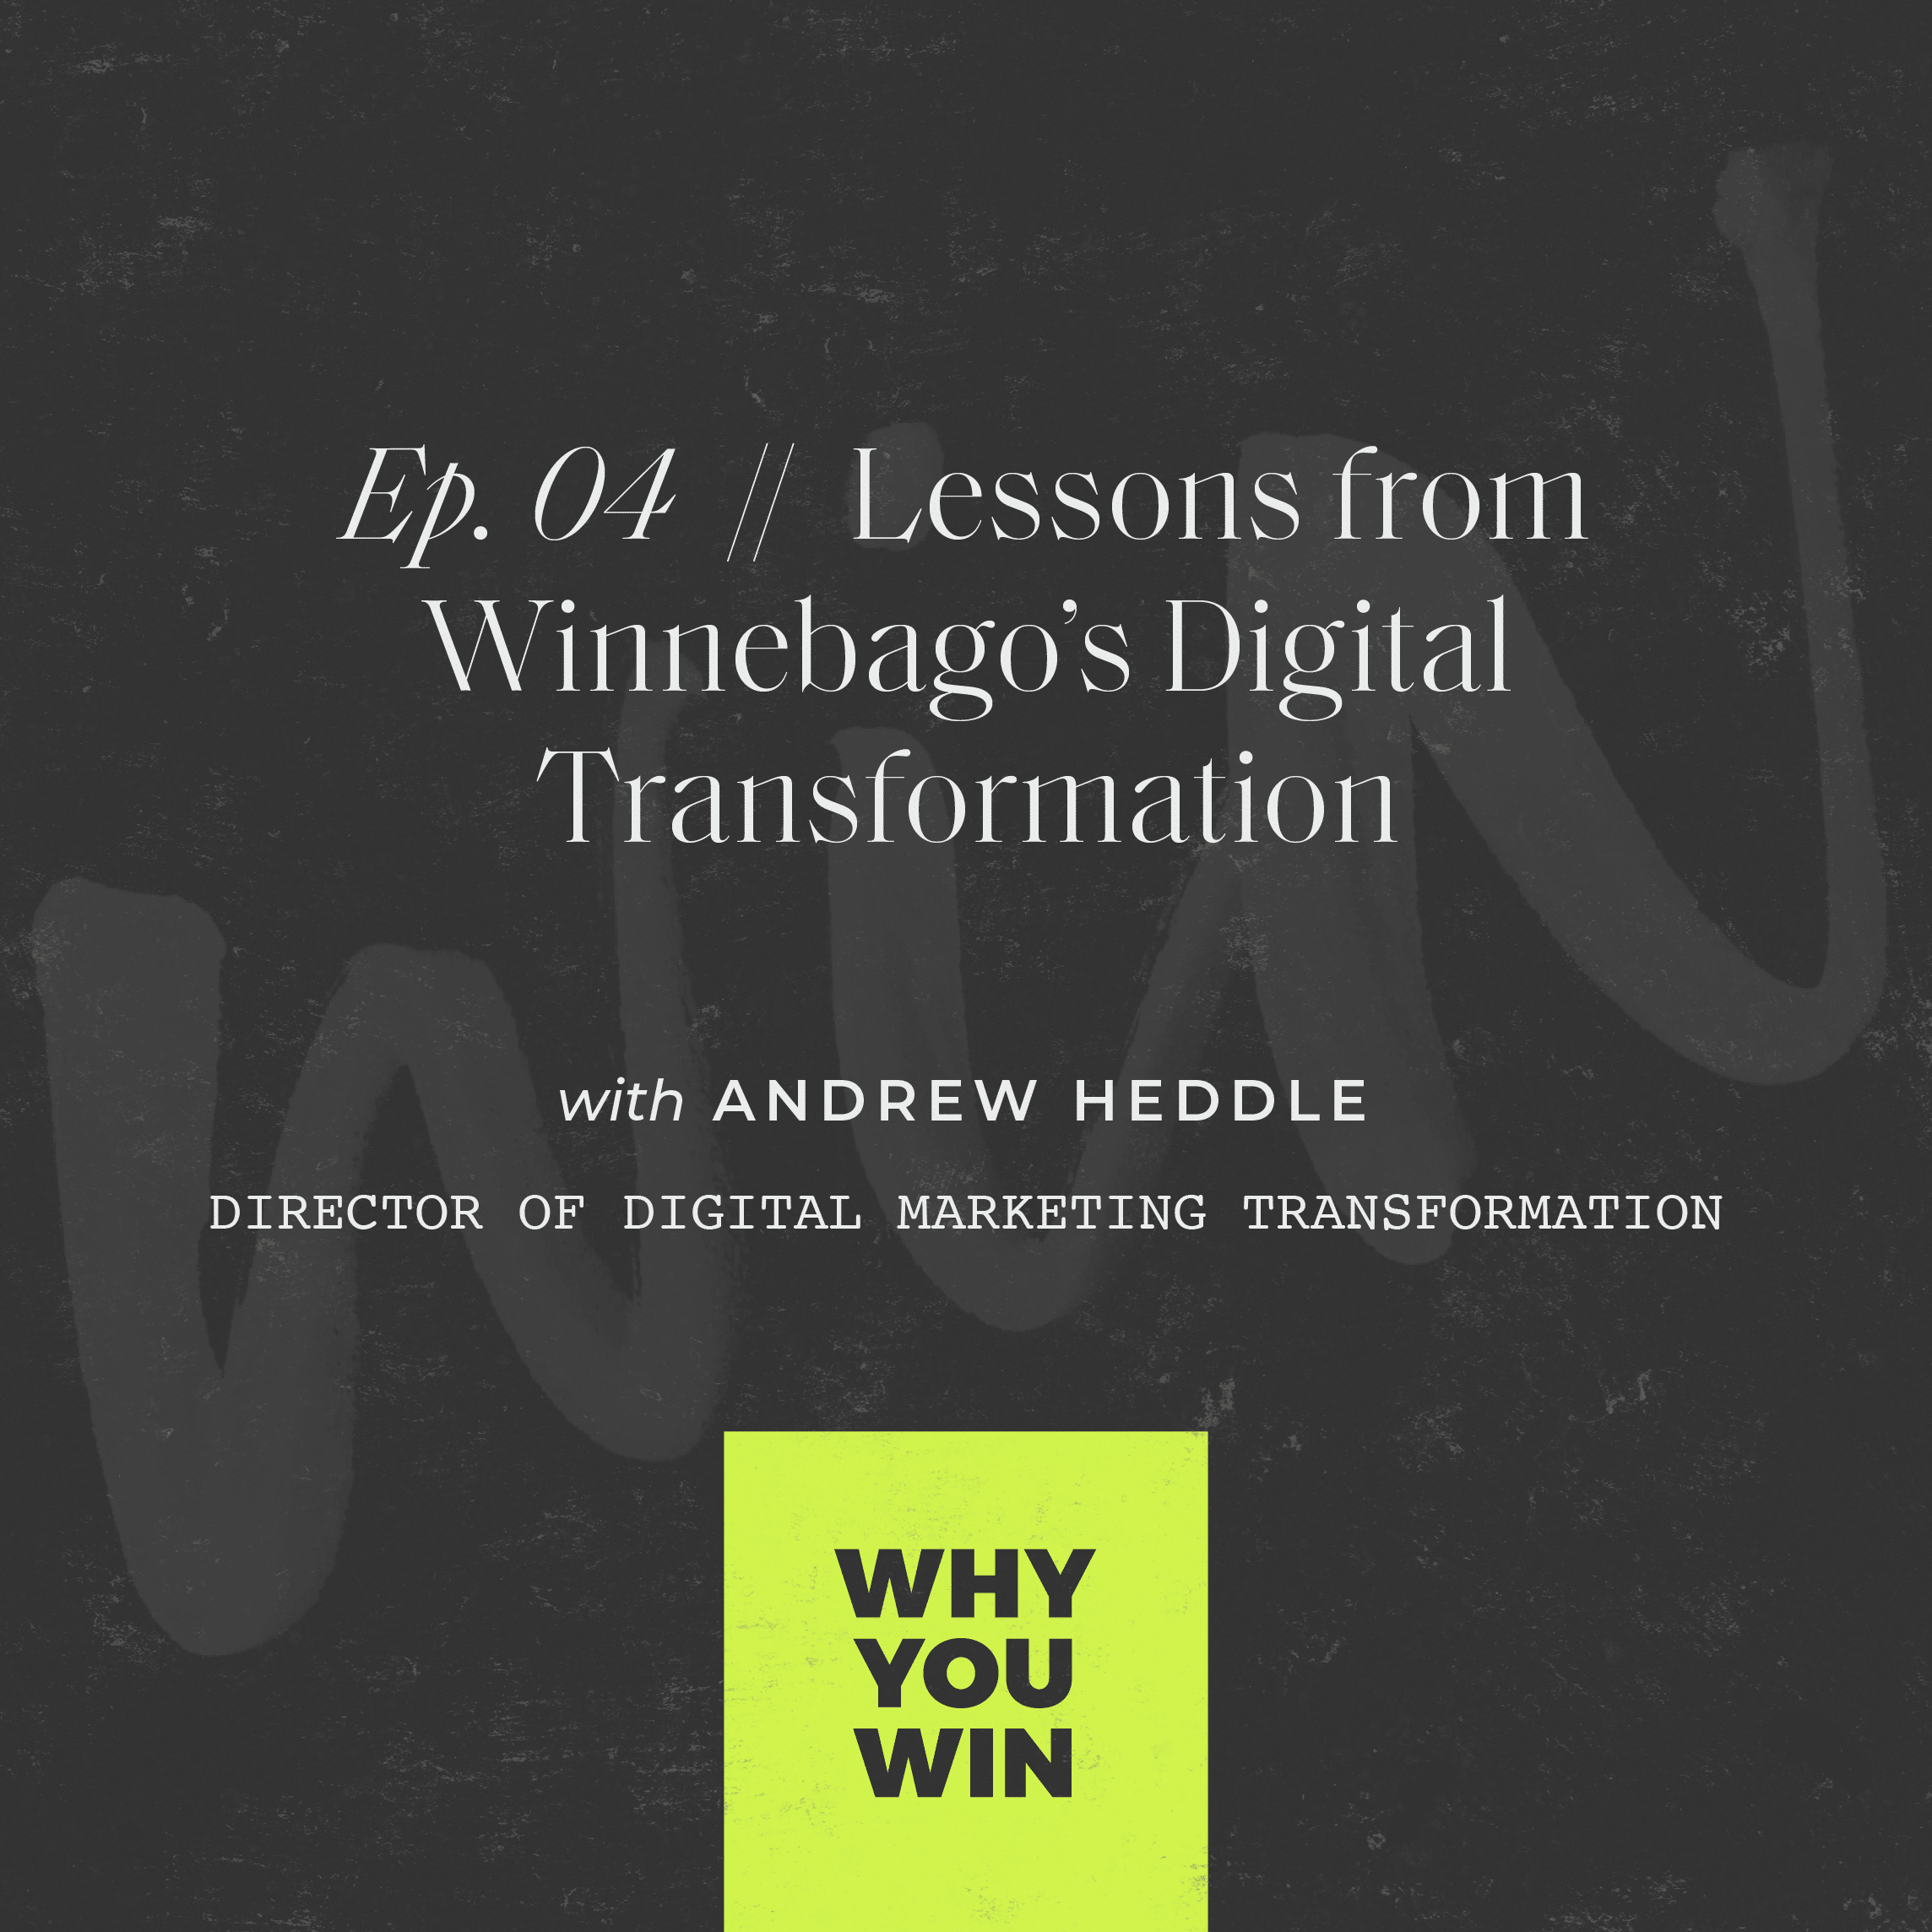 Lessons from Winnebago’s Digital Transformation with Andrew Heddle